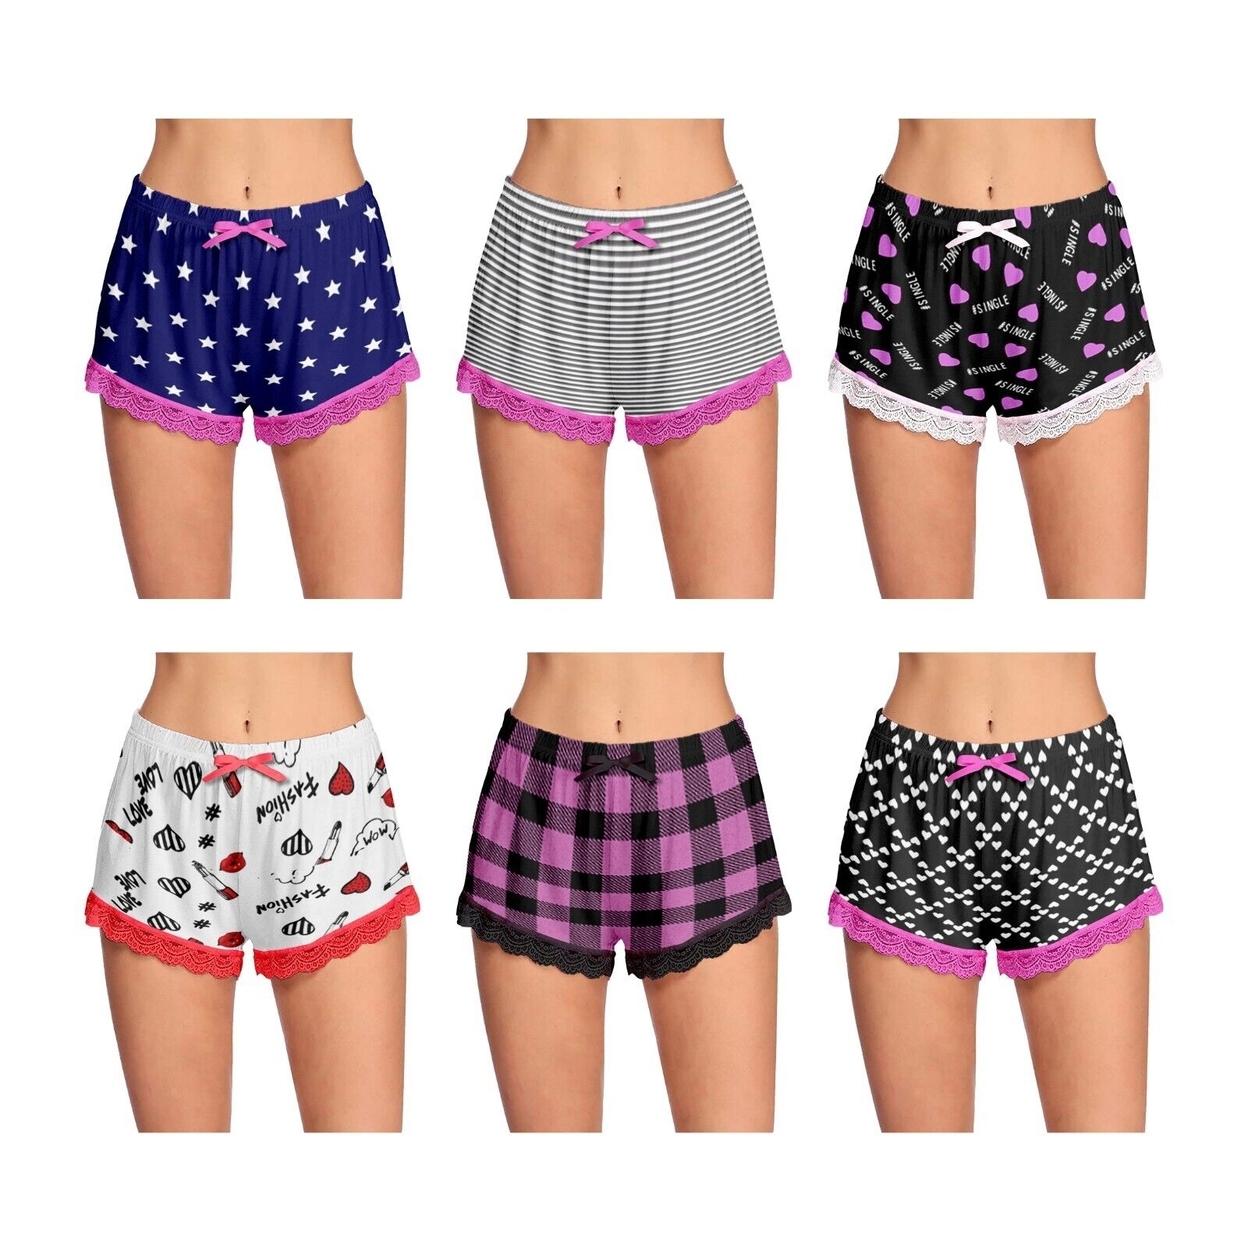 6-Pack: Women's Ultra-Soft Cozy Fun Printed Lace Trim Pajama Lounge Shorts - Small, Love